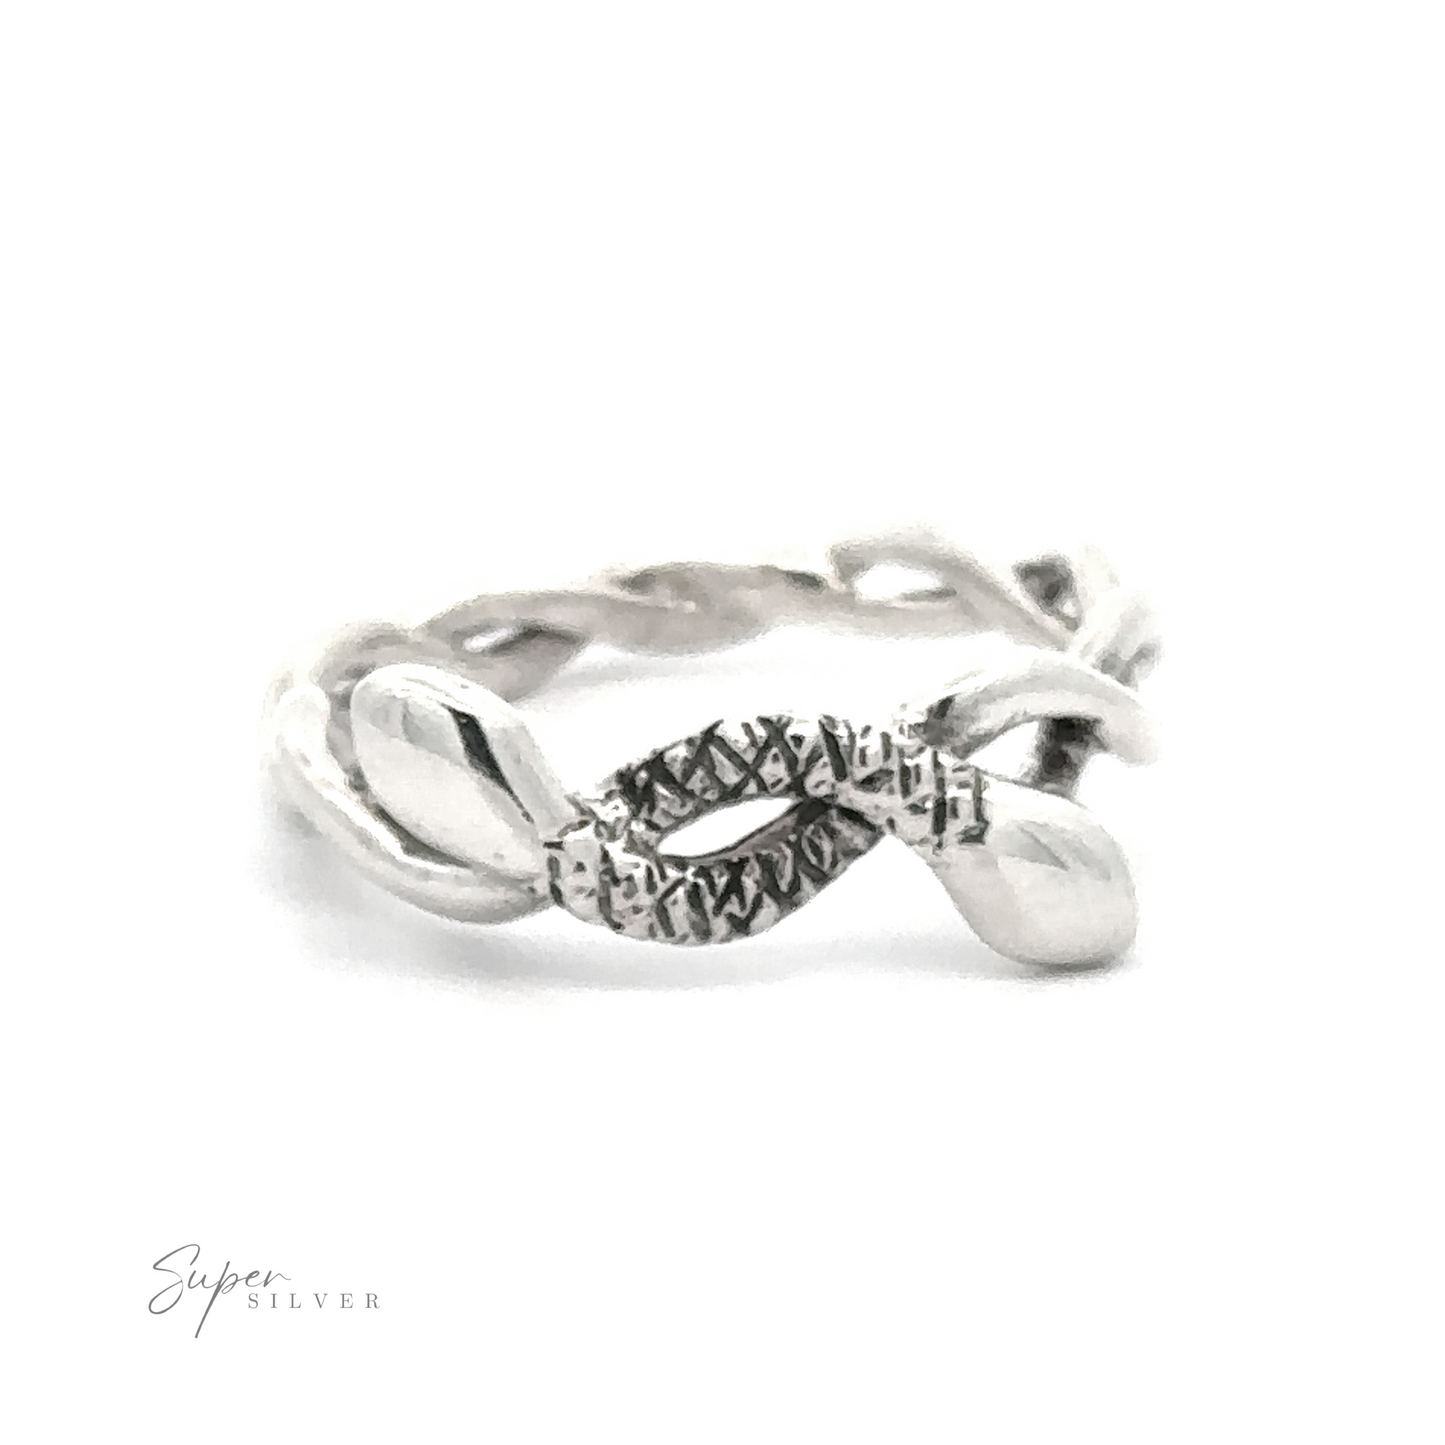 Intertwining Silver Snake Ring with a small cluster of diamonds at the center, displayed against a white background.